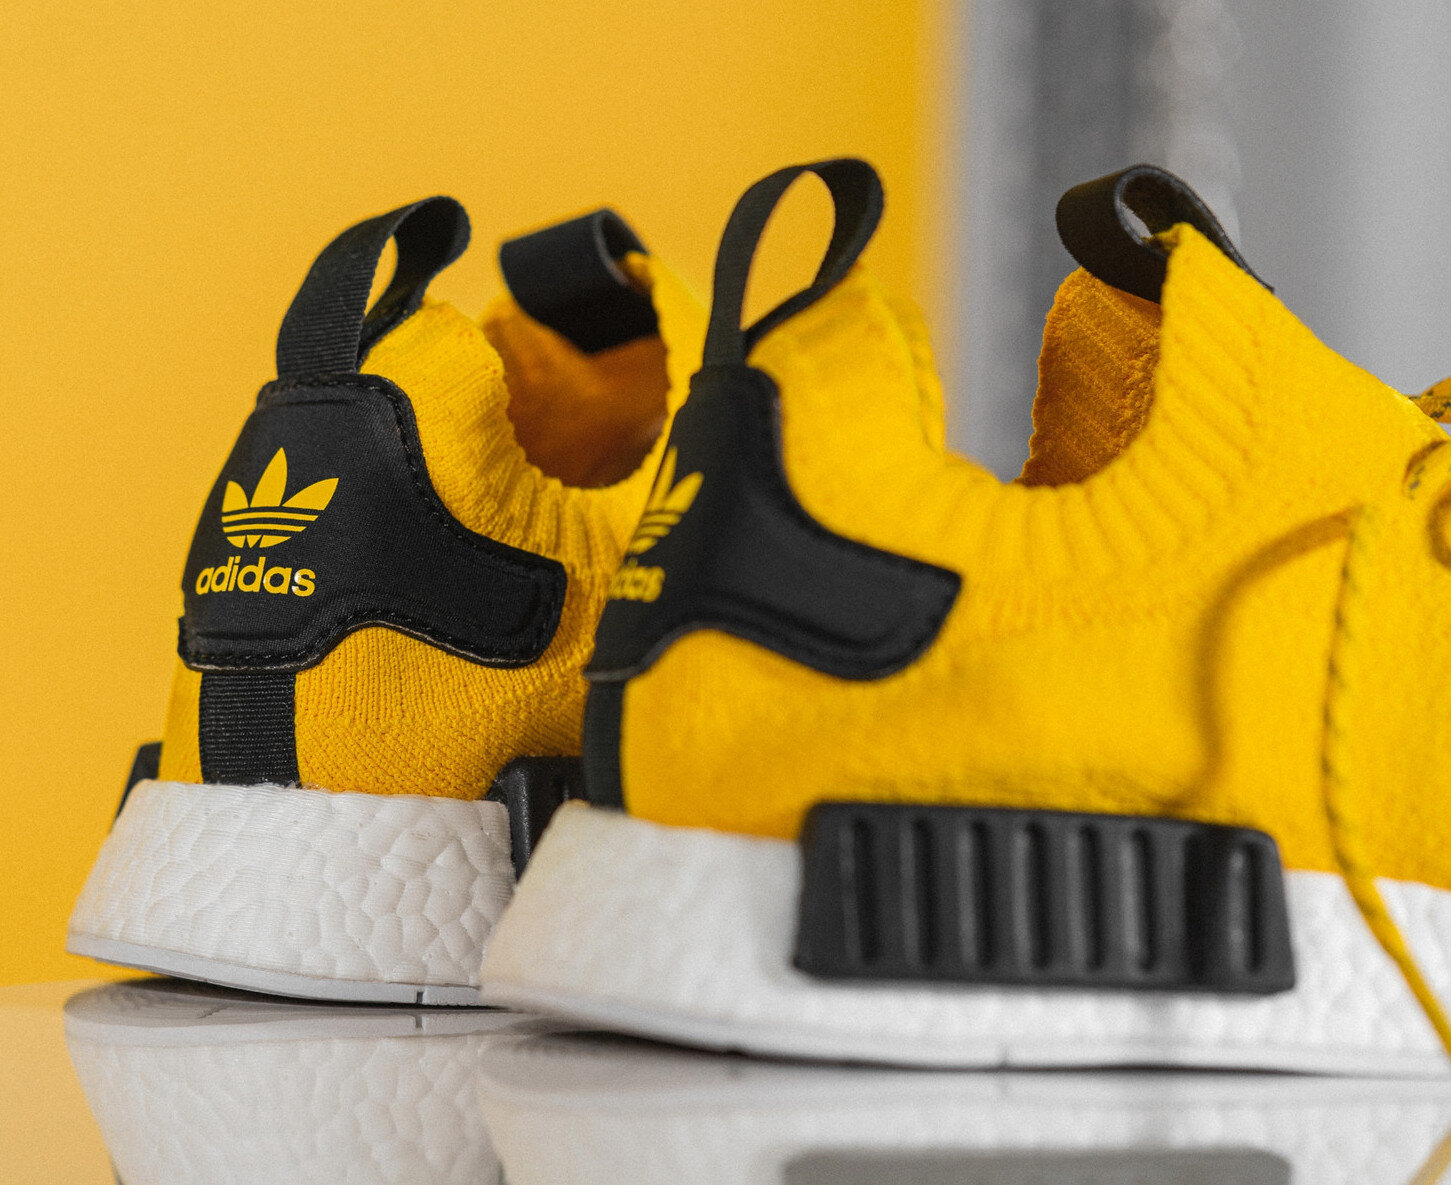 Now Available: adidas NMD R1 PK 